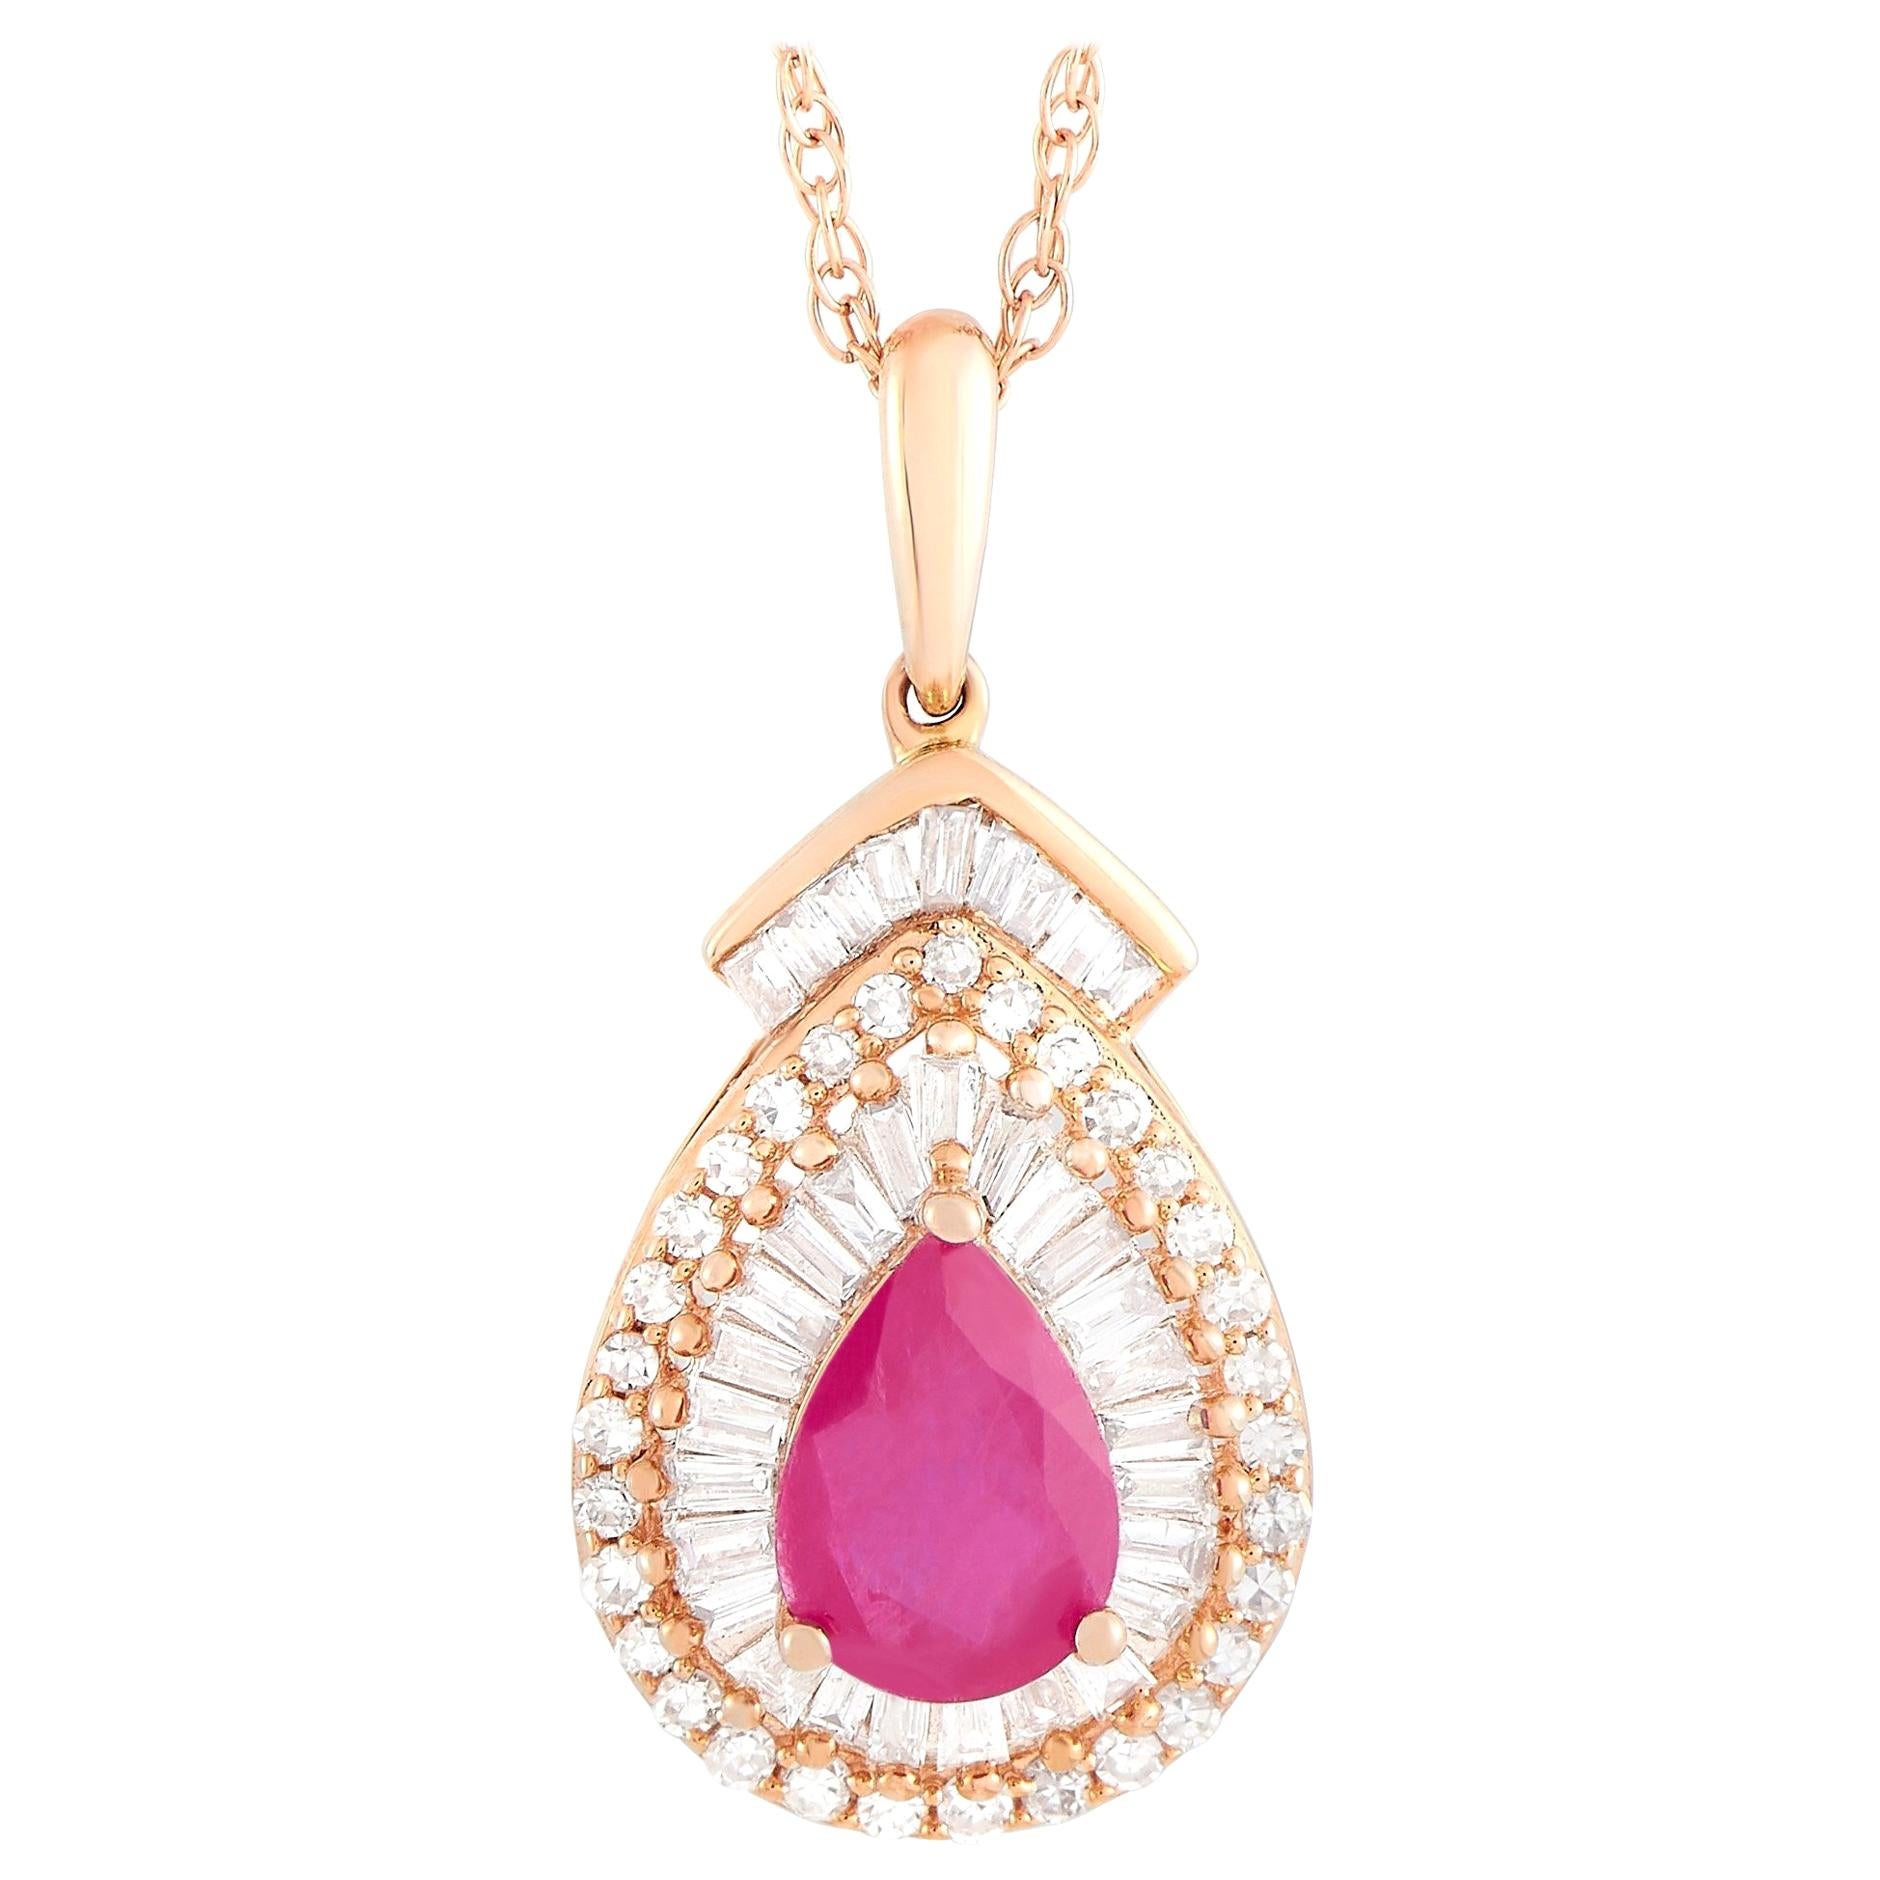 LB Exclusive 14 Karat Gold 0.50 Ct Diamond and 0.90 Ct Ruby Pear Shaped Pendant